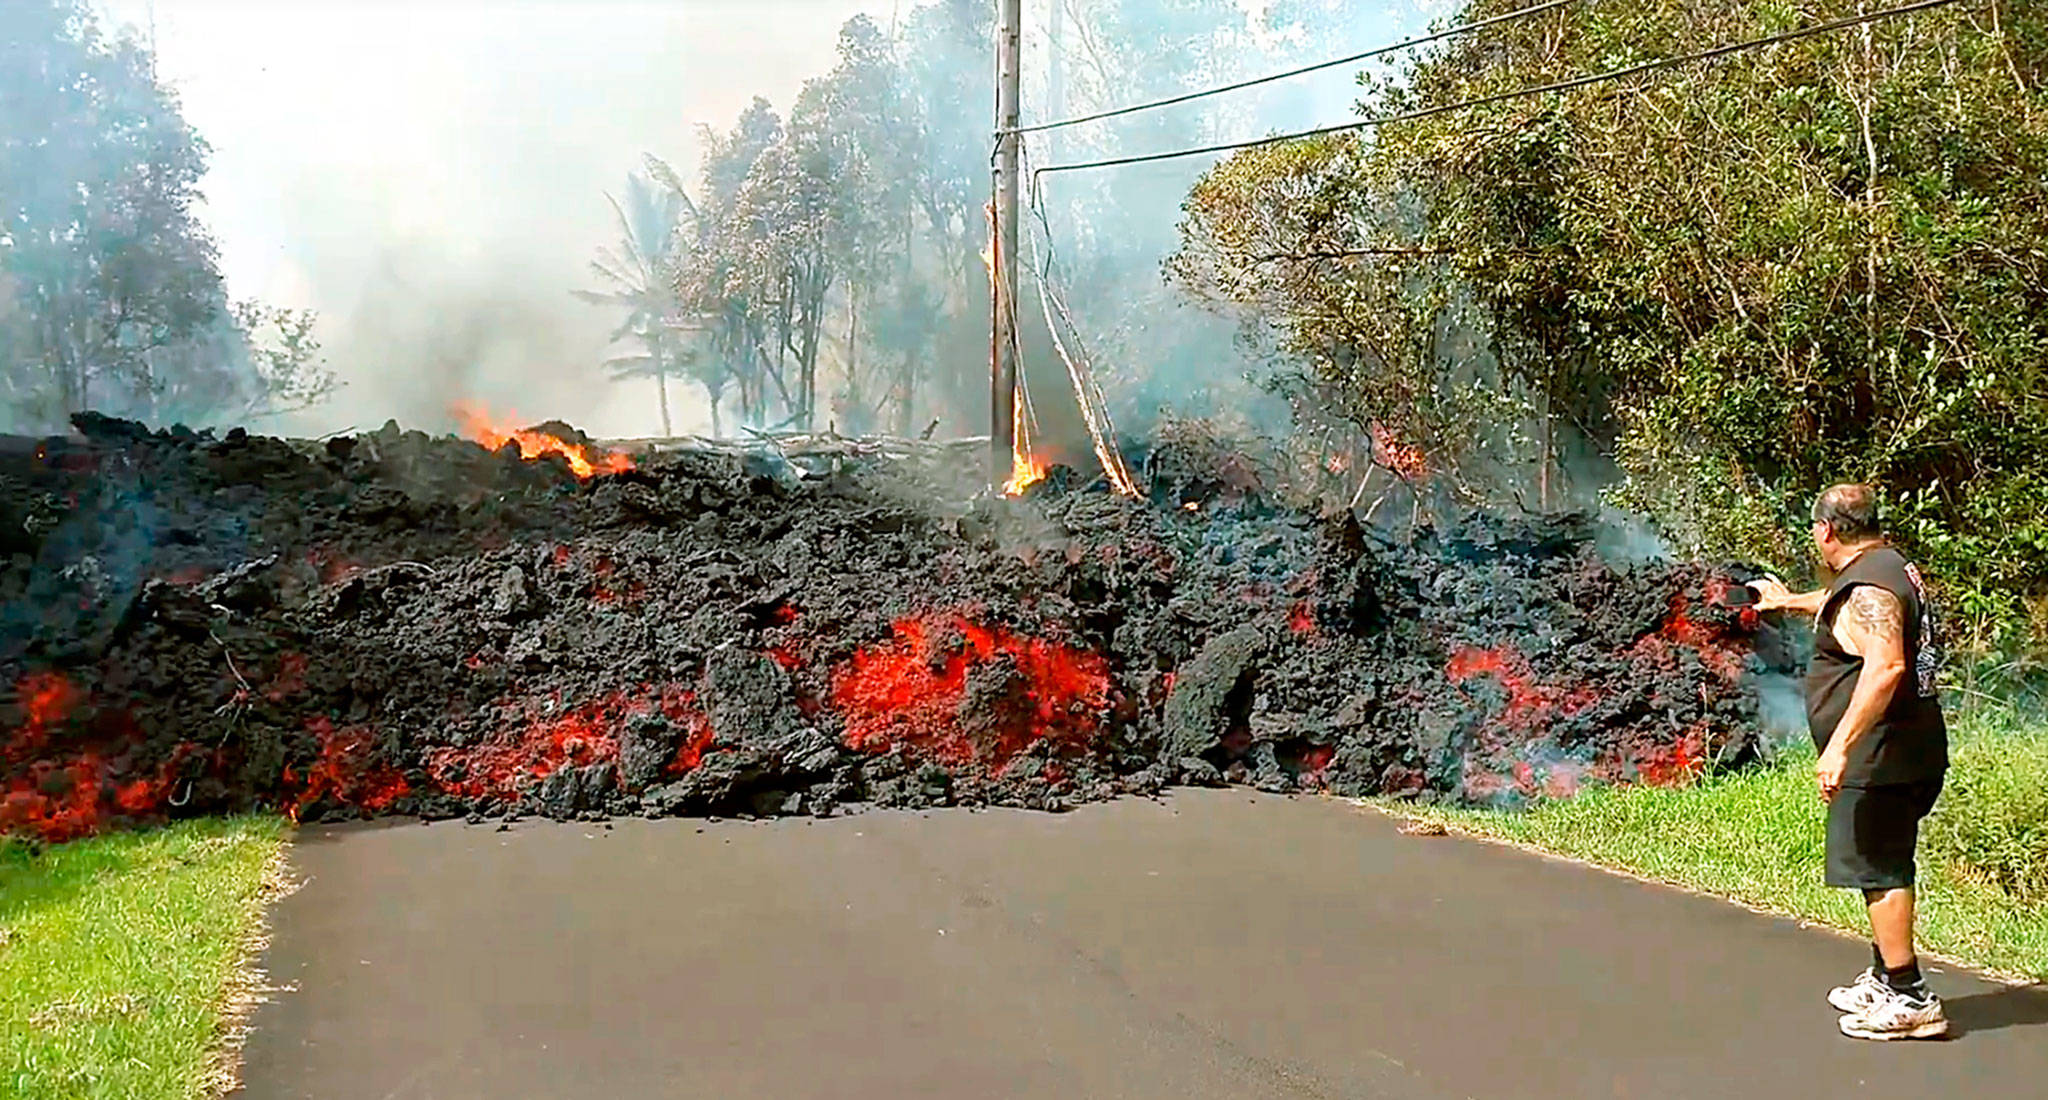 An unidentified man gets close to a lava flow advancing down a road in the Leilani Estates subdivision near Pahoa on the island of Hawaii on Monday. (Scott Wiggers/Apau Hawaii Tours via AP)